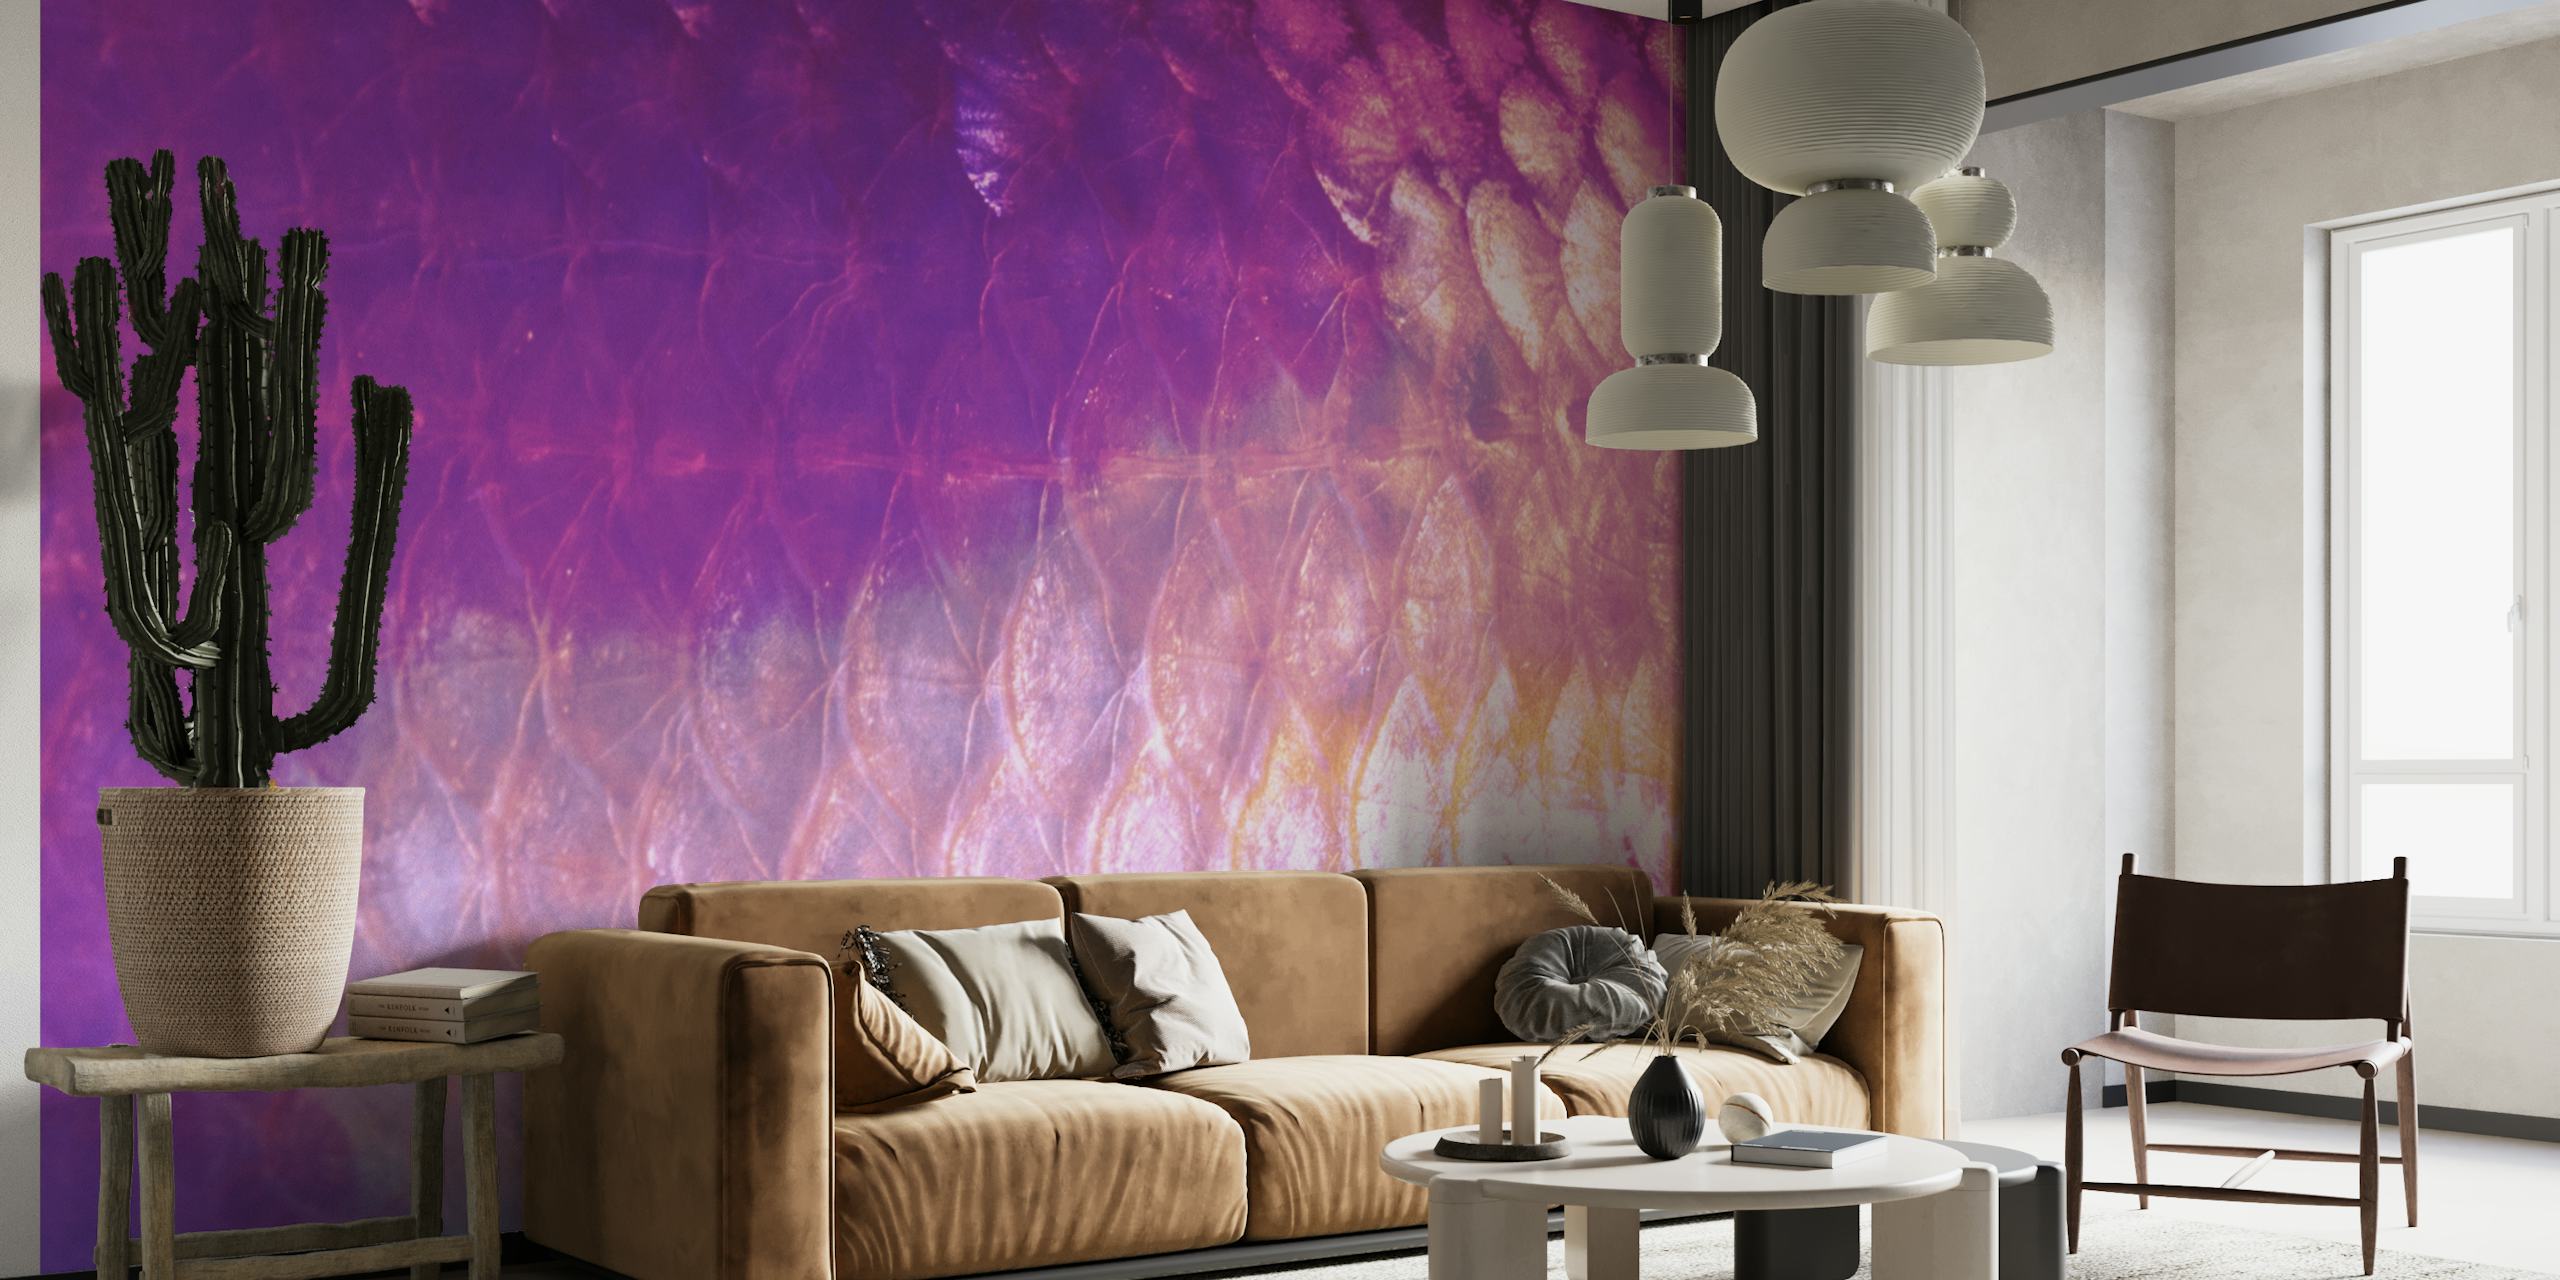 Mystic Koi Fish wall mural with purple, pink, and gold watercolor shades